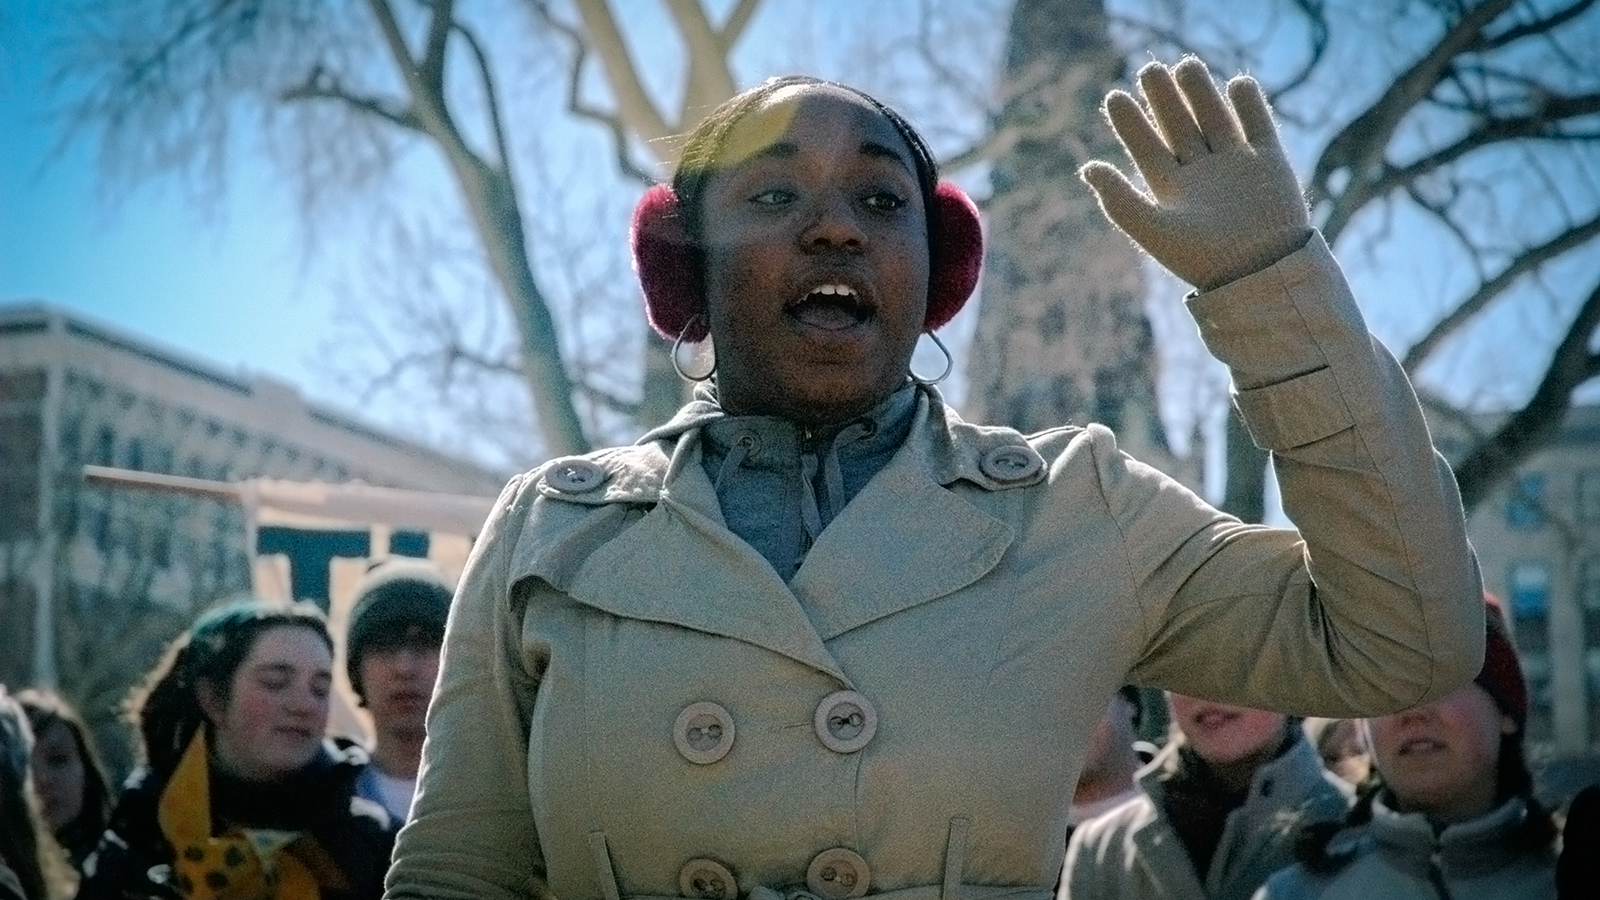 A woman in red earmuffs speaks with one raised against a blue sky with people and trees in the background